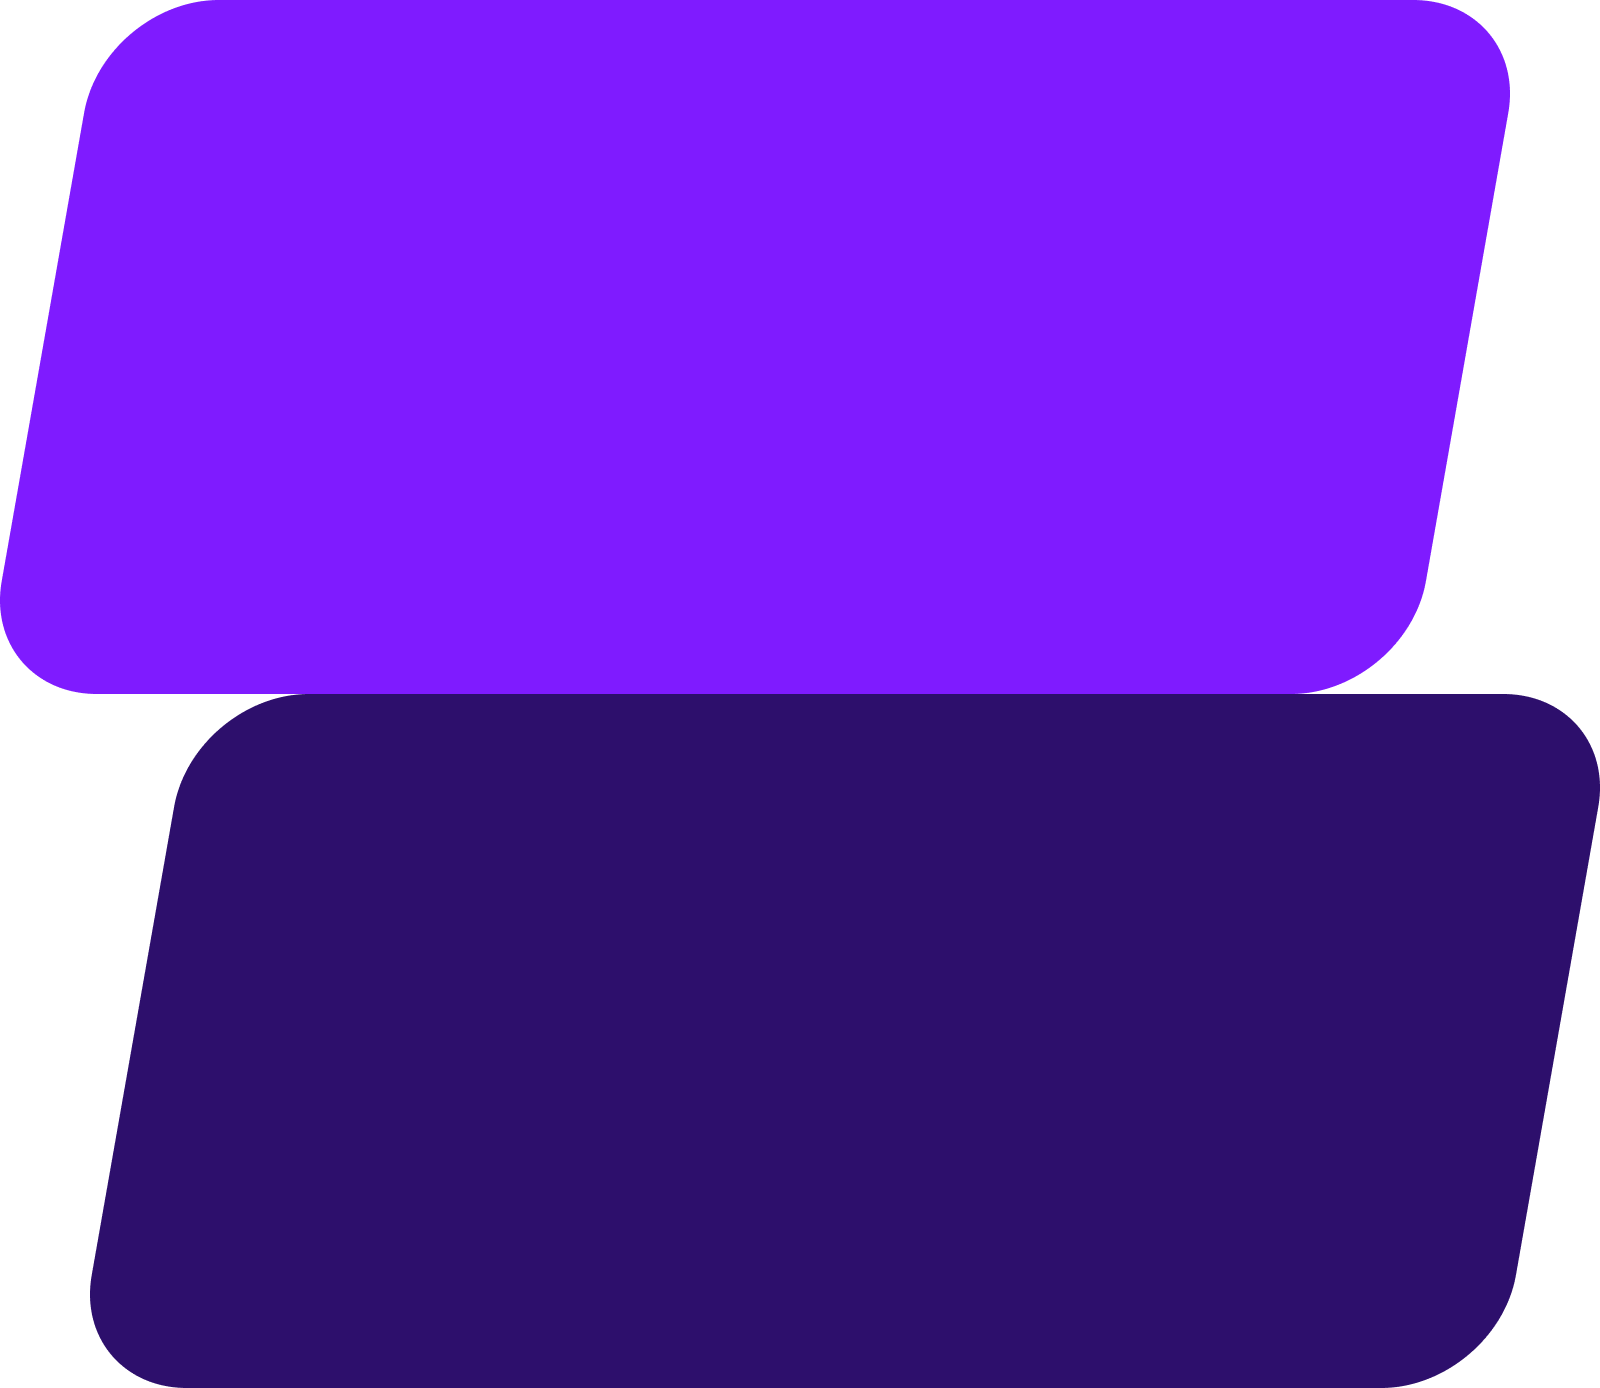 Abstract purple graphic shapes on transparent background.